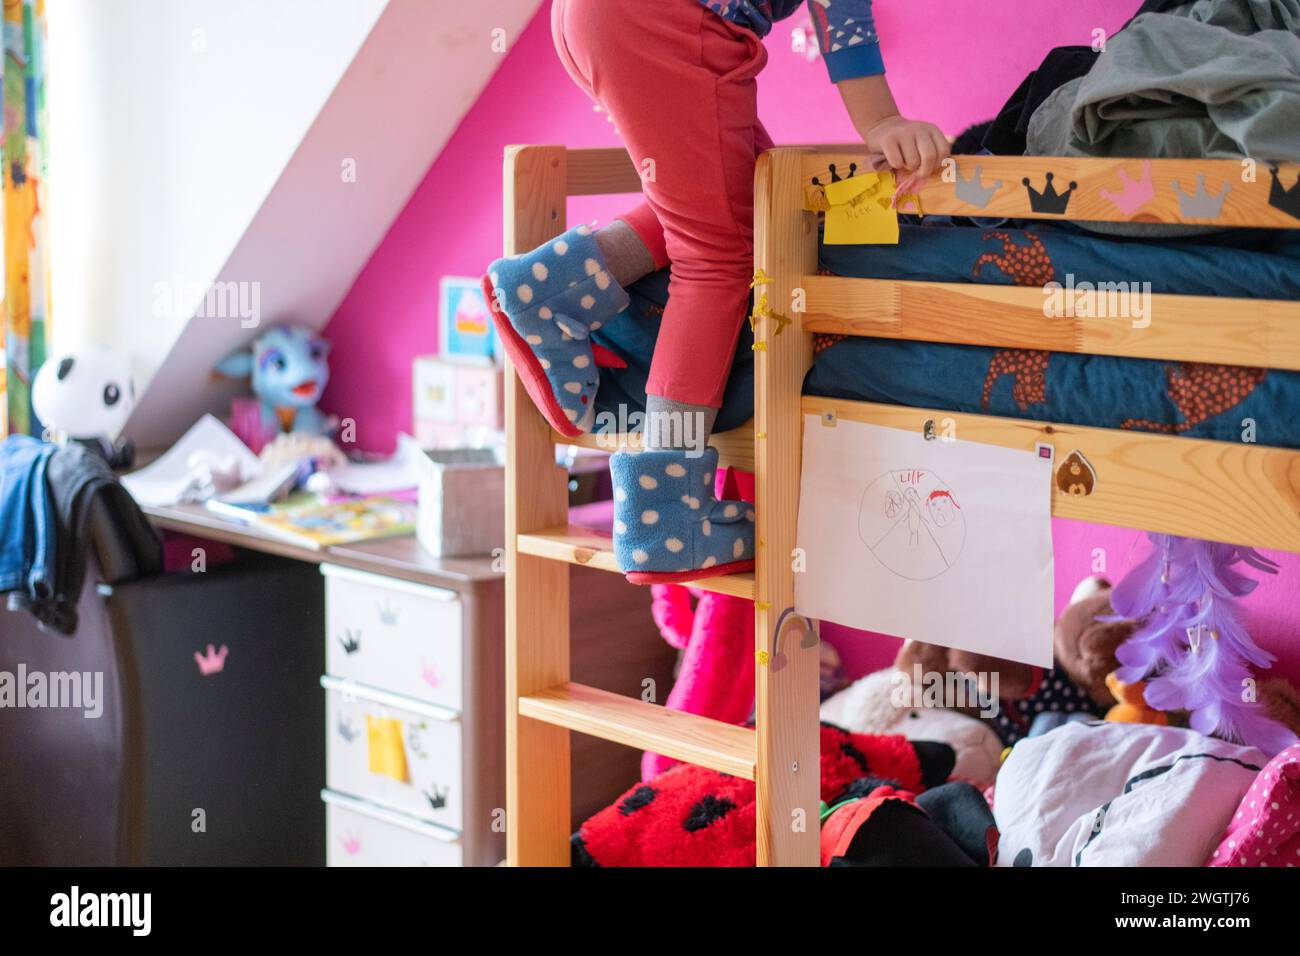 young girl climbing her bunkbed with fluffy slipper shoes on Stock Photo